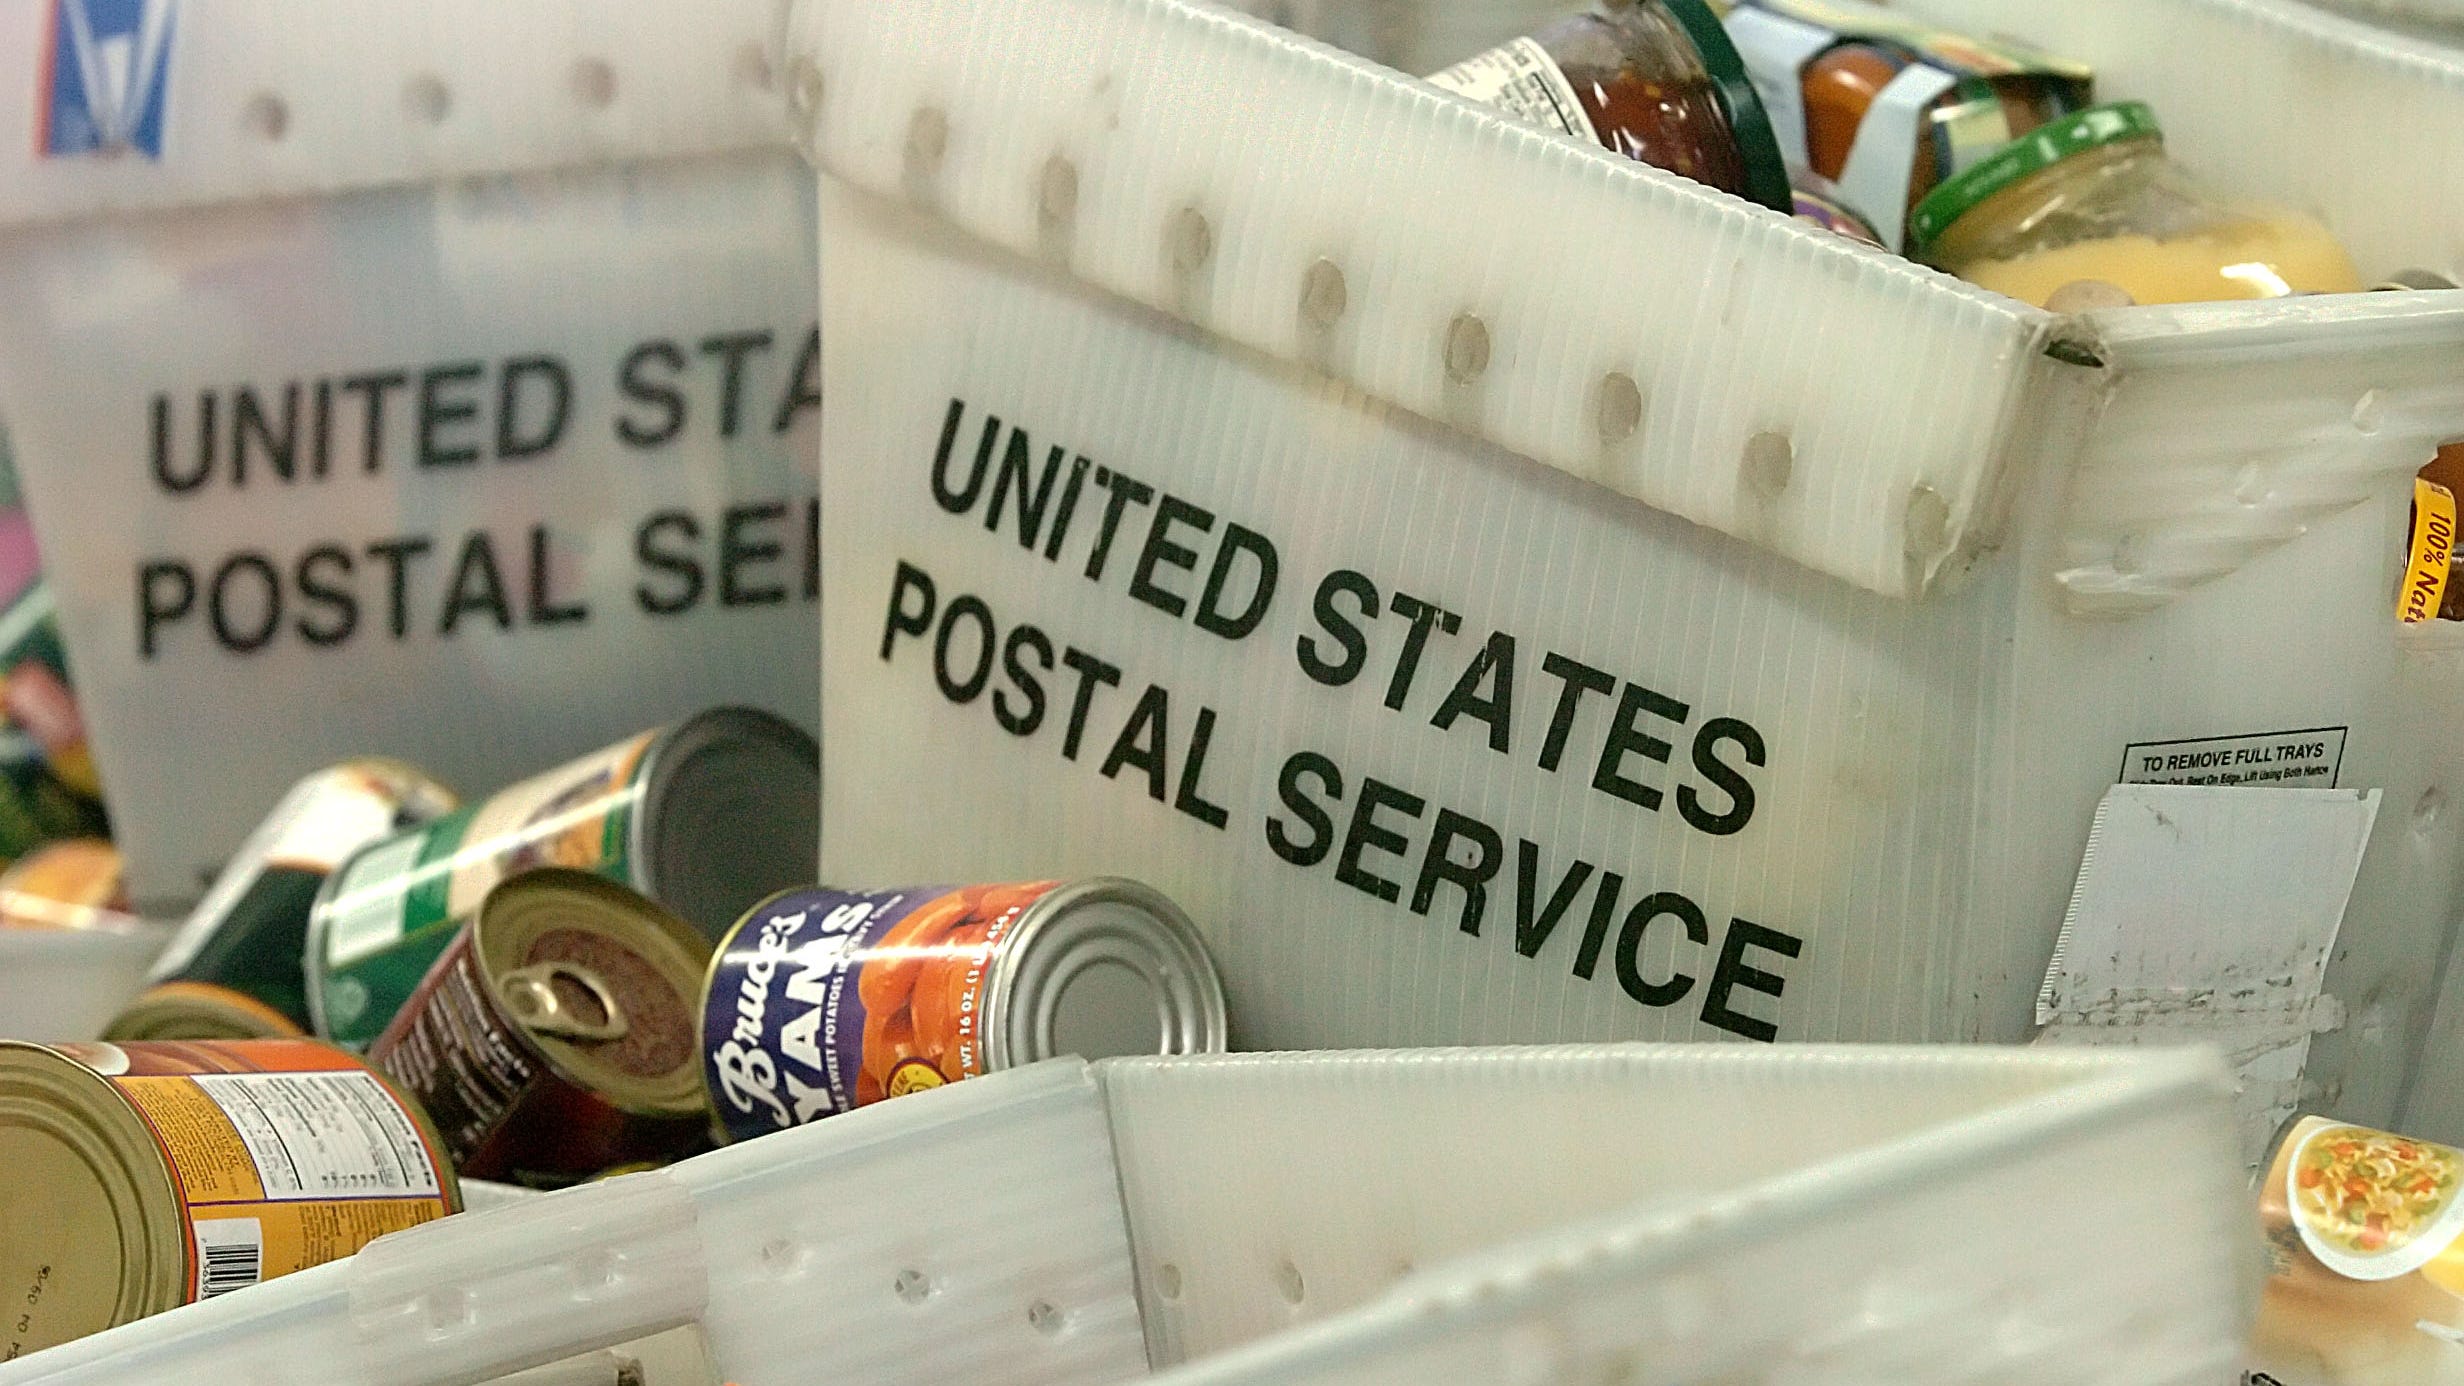 Postal carriers make special deliveries in food drive next Saturday